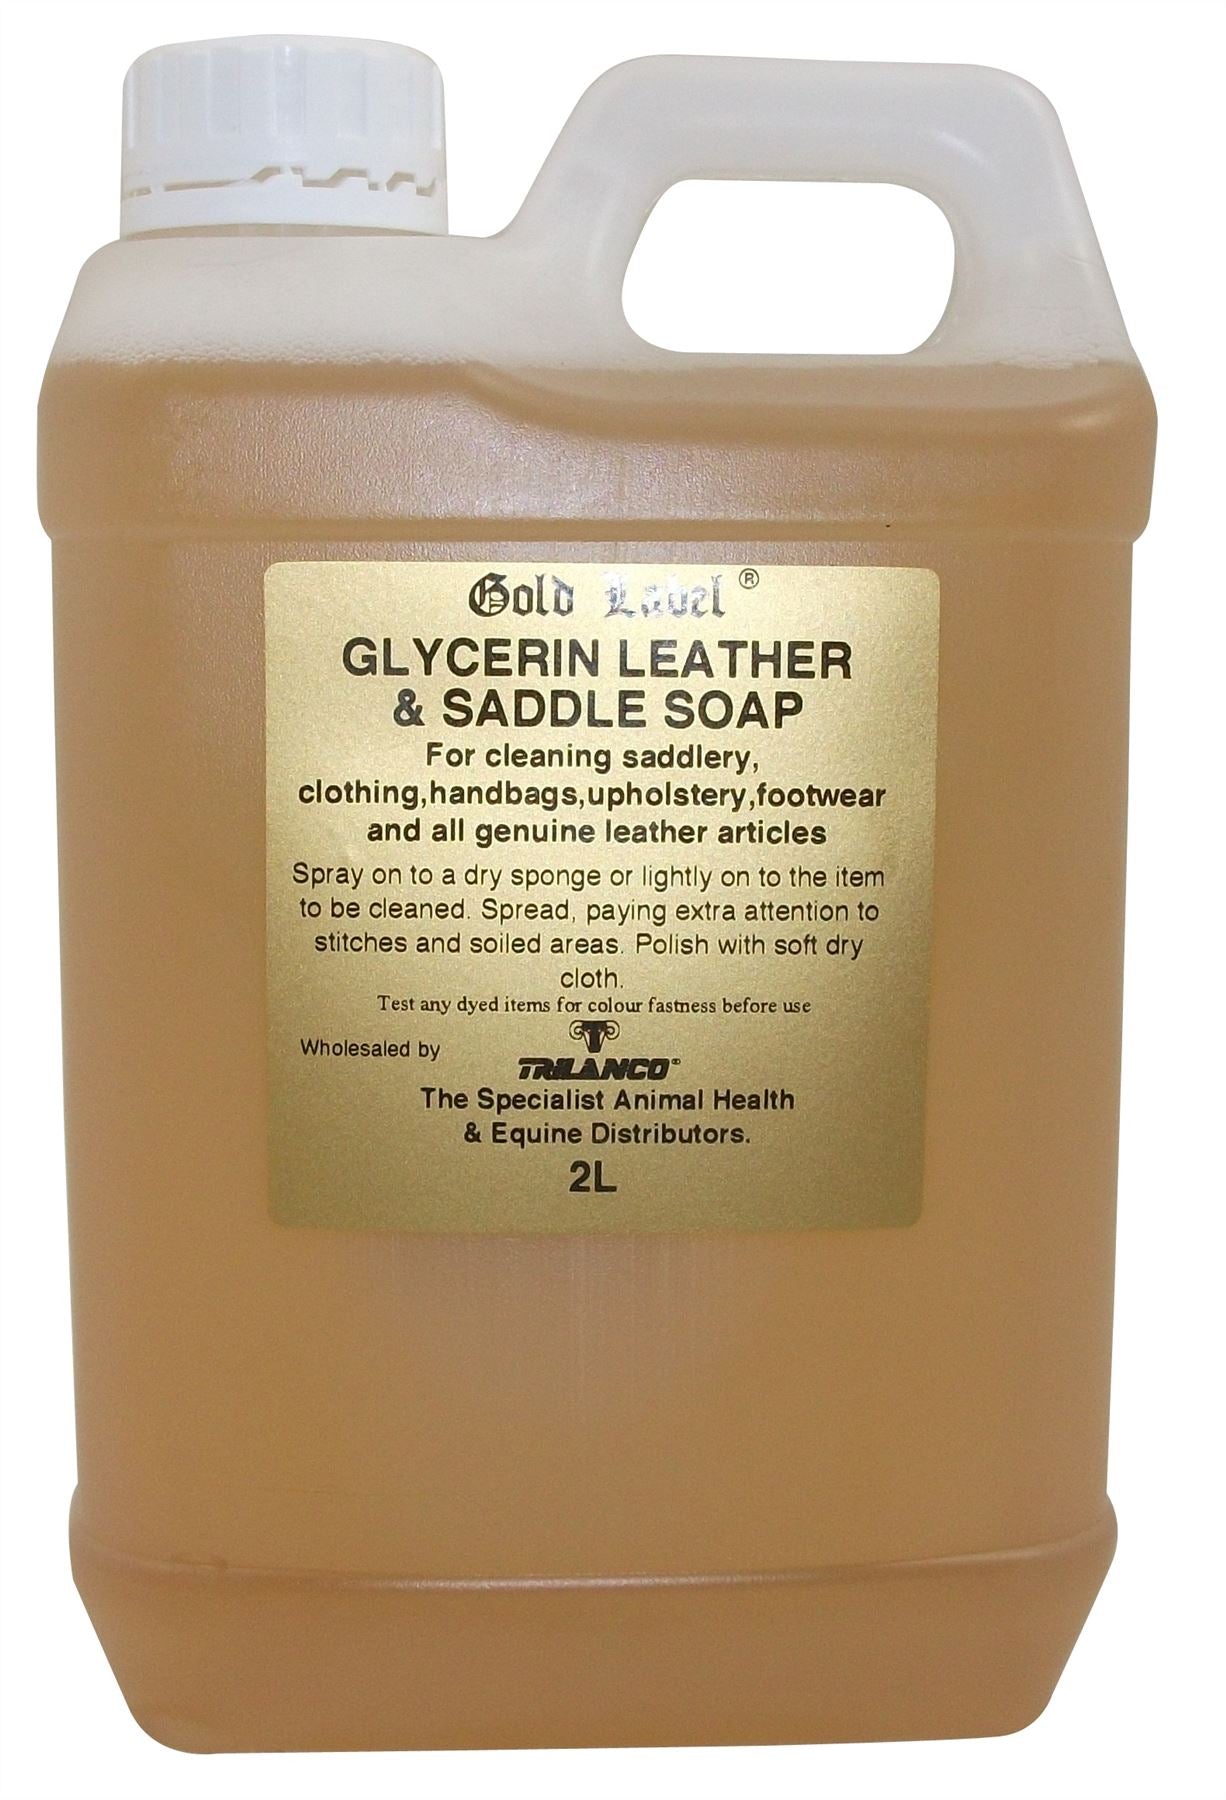 Gold Label Glycerin Leather & Saddle Soap Liquid - Just Horse Riders